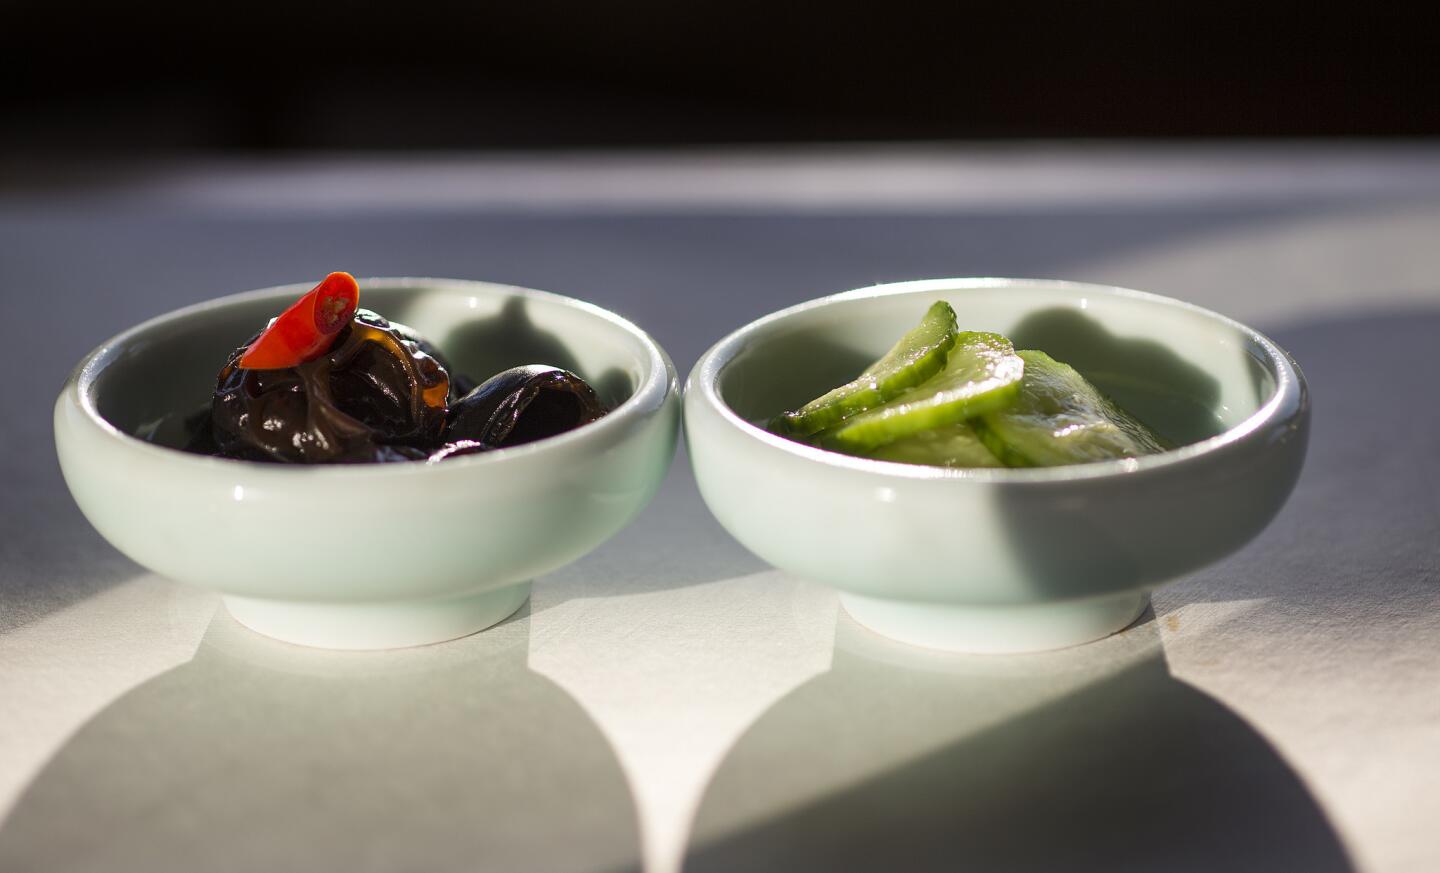 Wood ear fungus and cucumber soaked in special paste are the first course in the nine-course tasting menu.